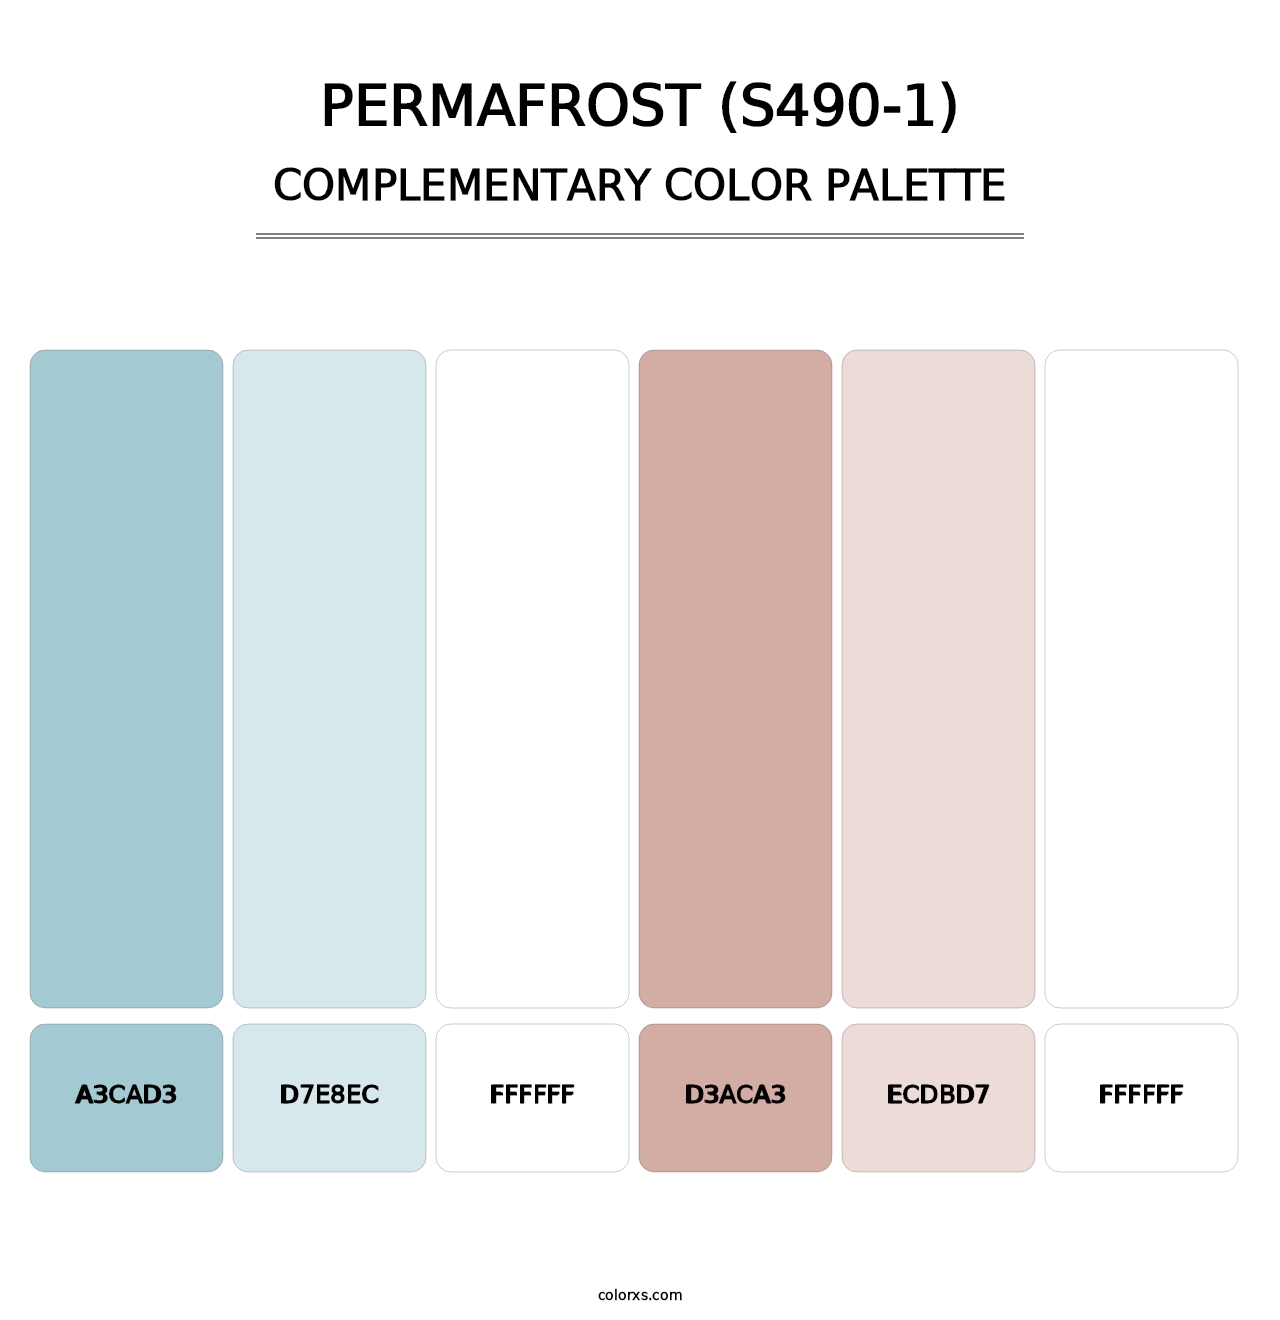 Permafrost (S490-1) - Complementary Color Palette